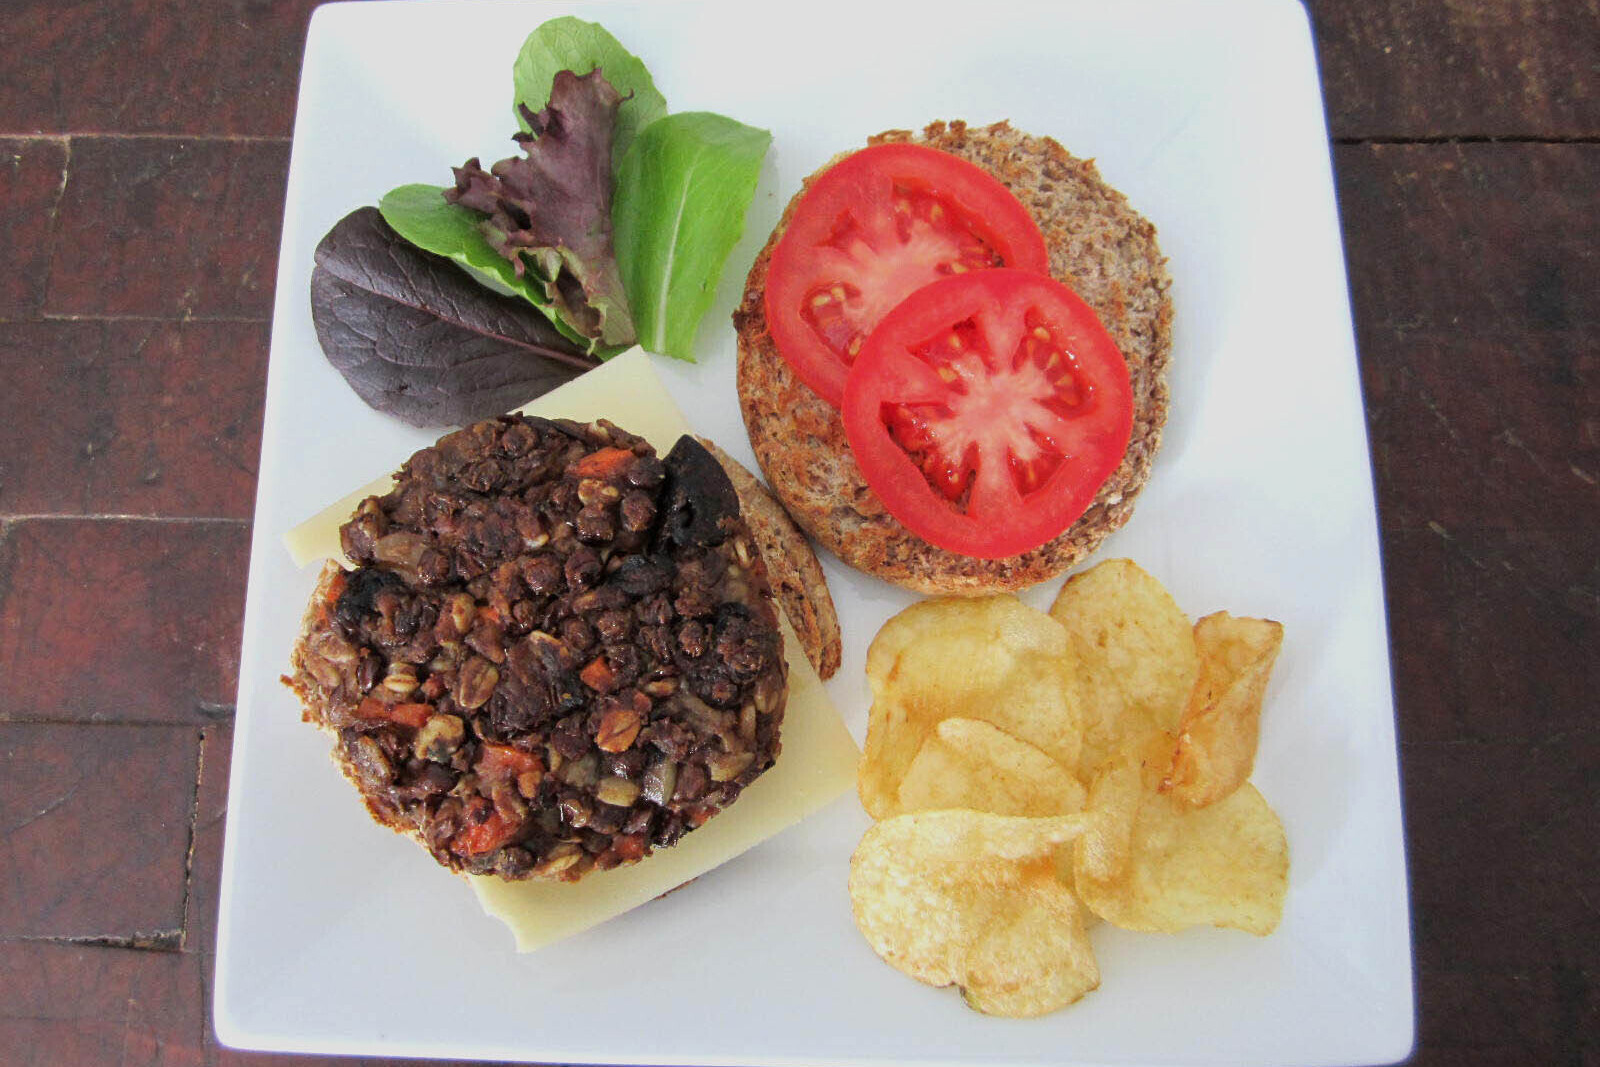 Lentil carrot burgers with cheese, tomatoes, lettuce and chips on the side